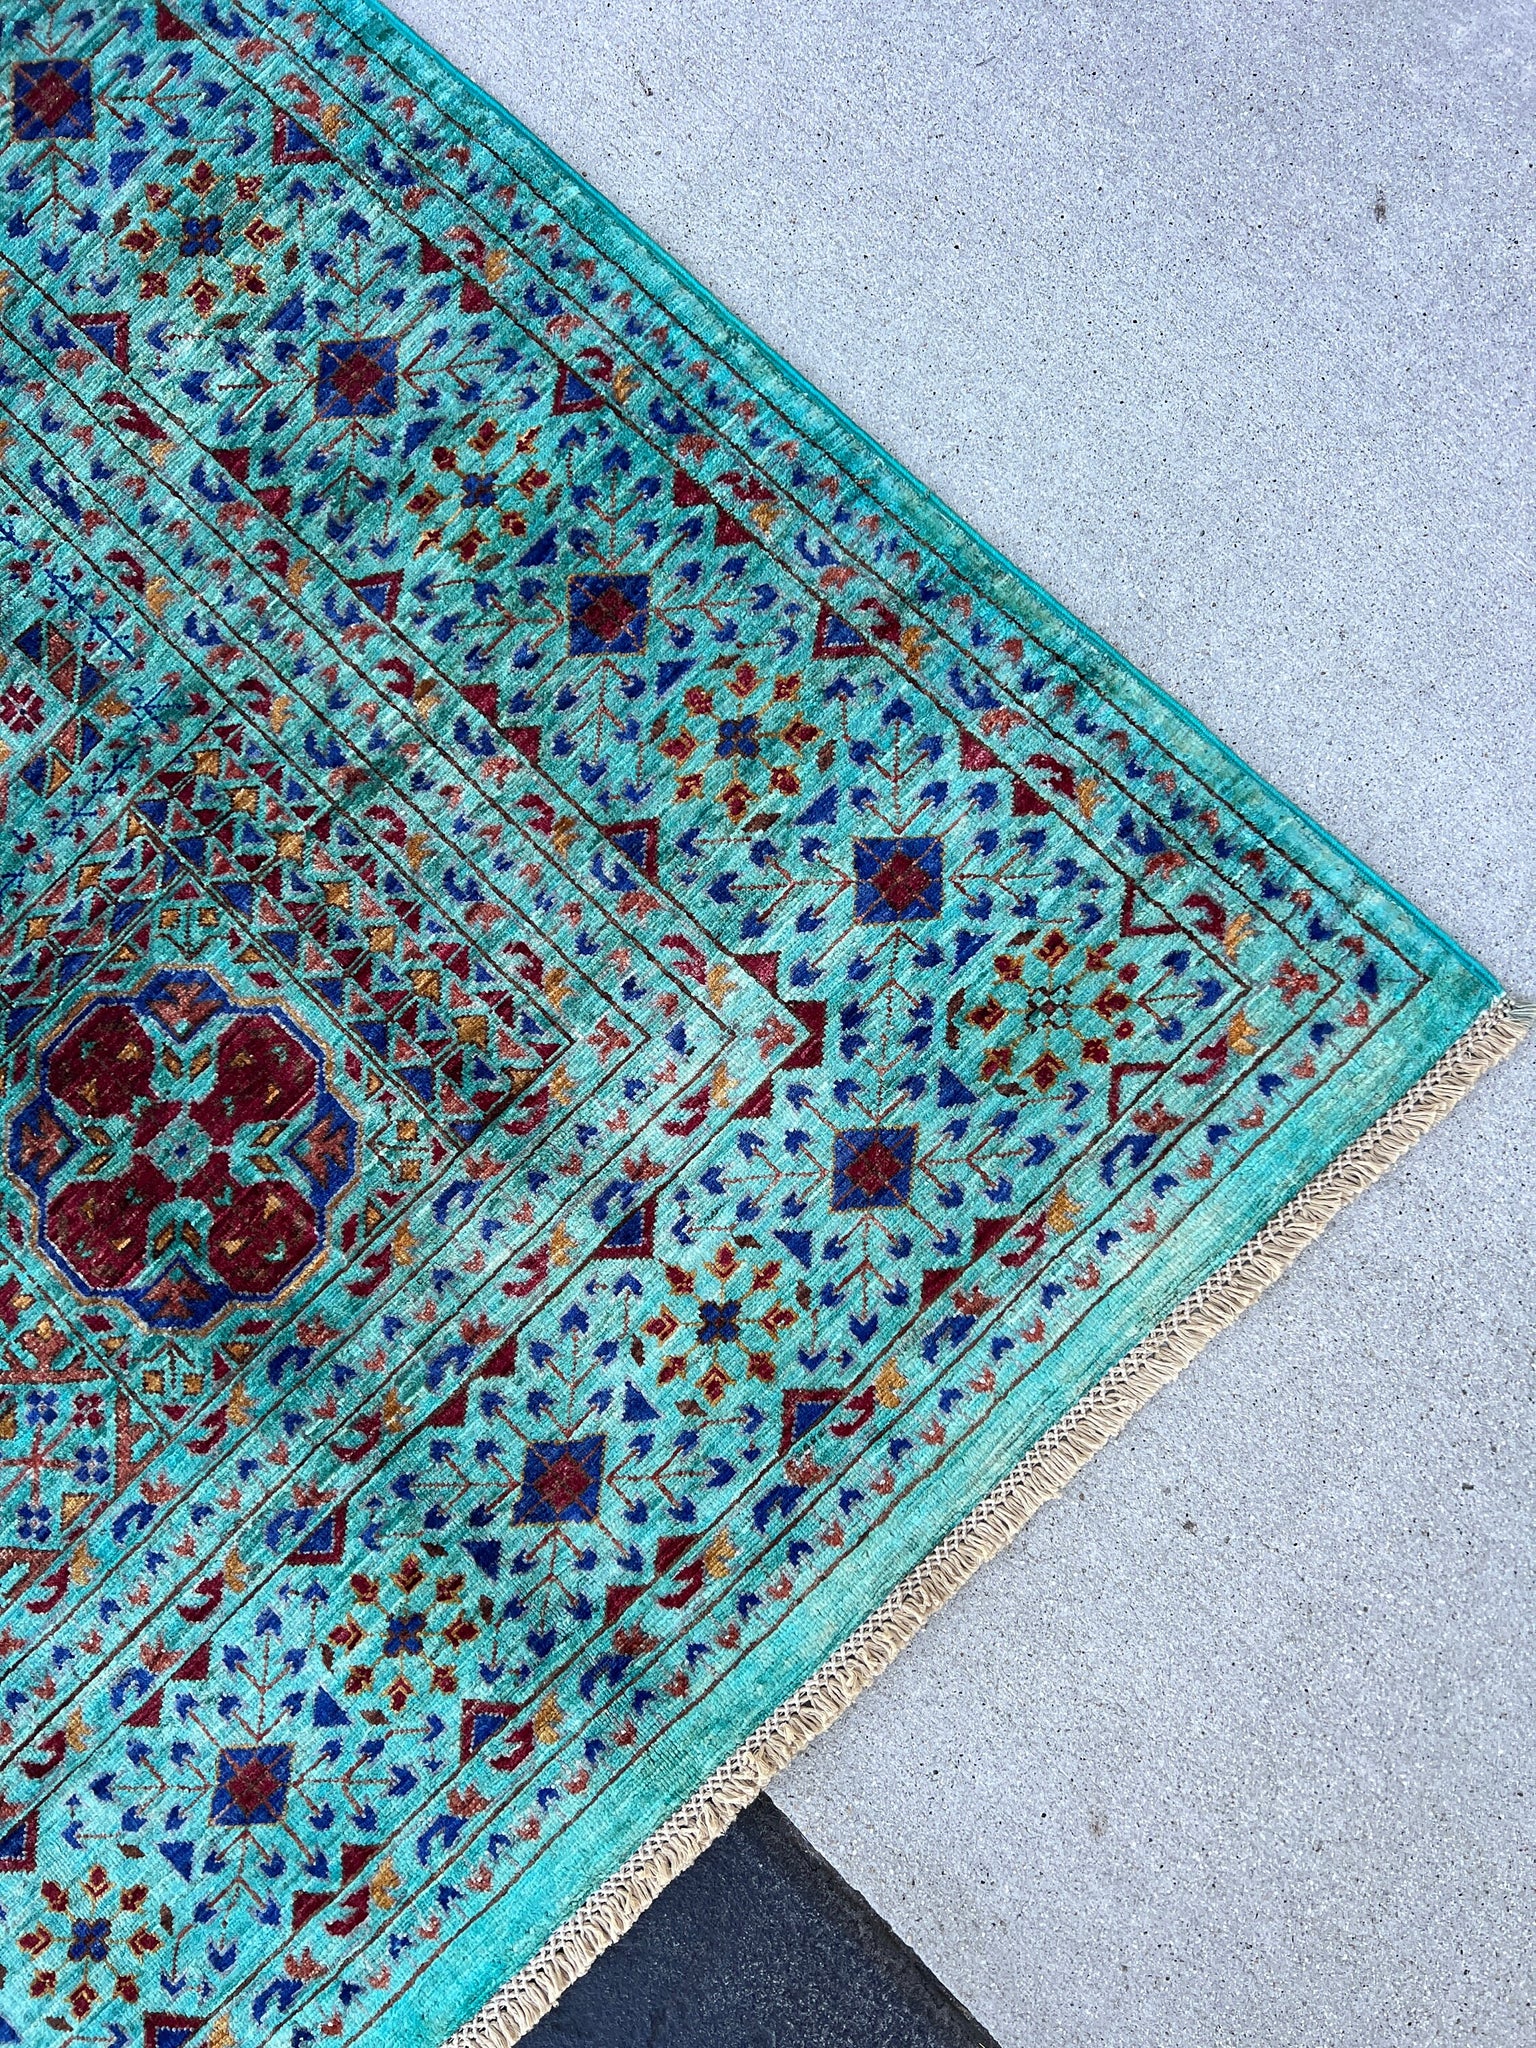 6x8 (180x245) Hand Knotted Afghan Rug | Teal Turquoise Terra Cotta Royal Blue Forest Green Mustard Yellow Ivory Burgundy | Wool Mamluk